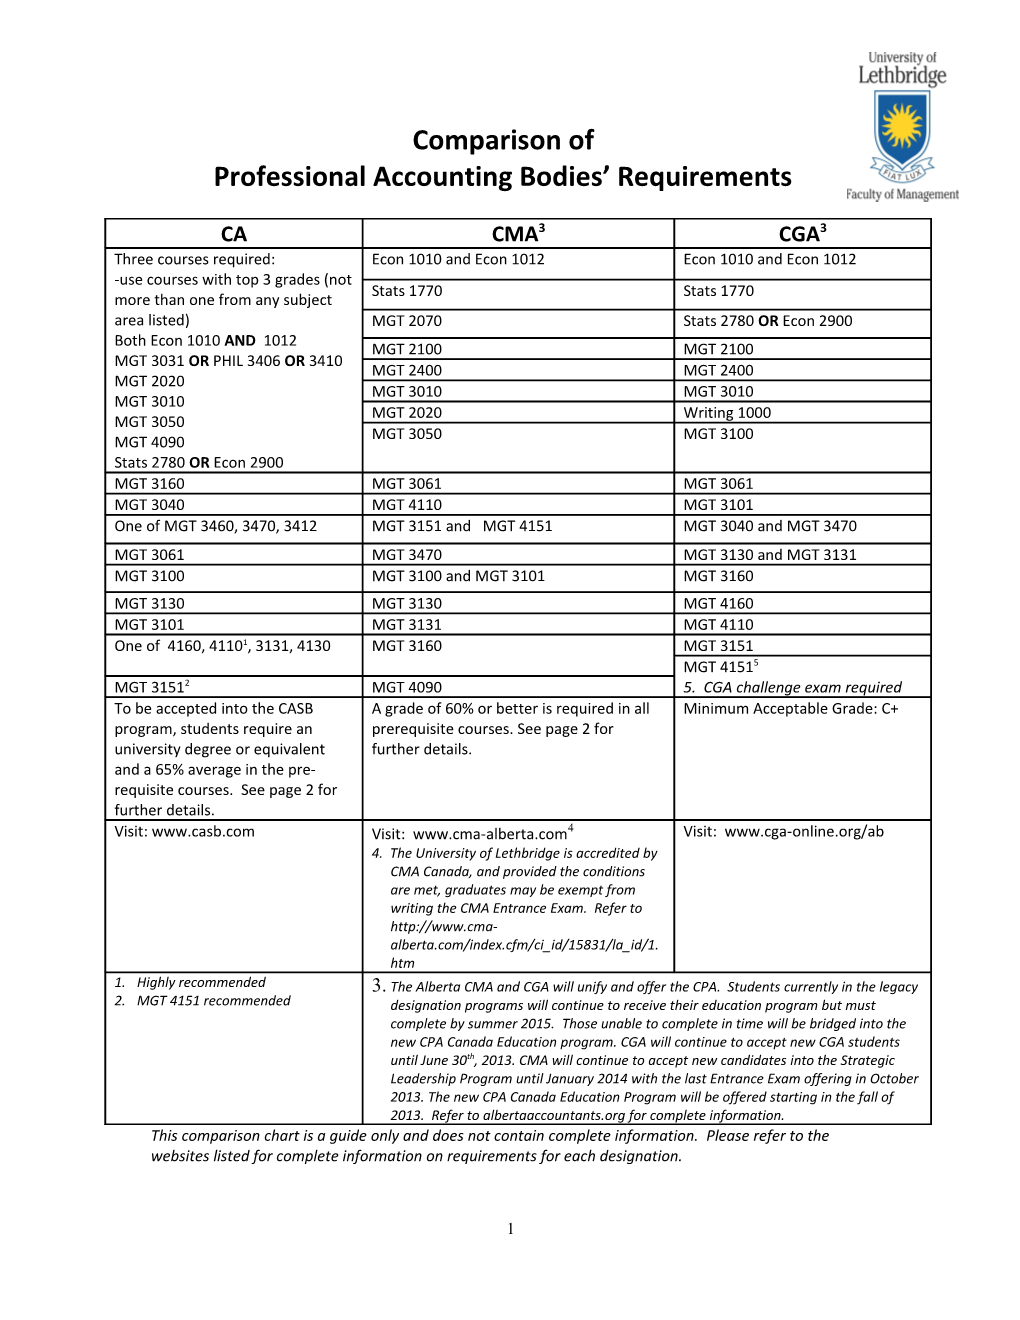 Professional Accounting Bodies Requirements